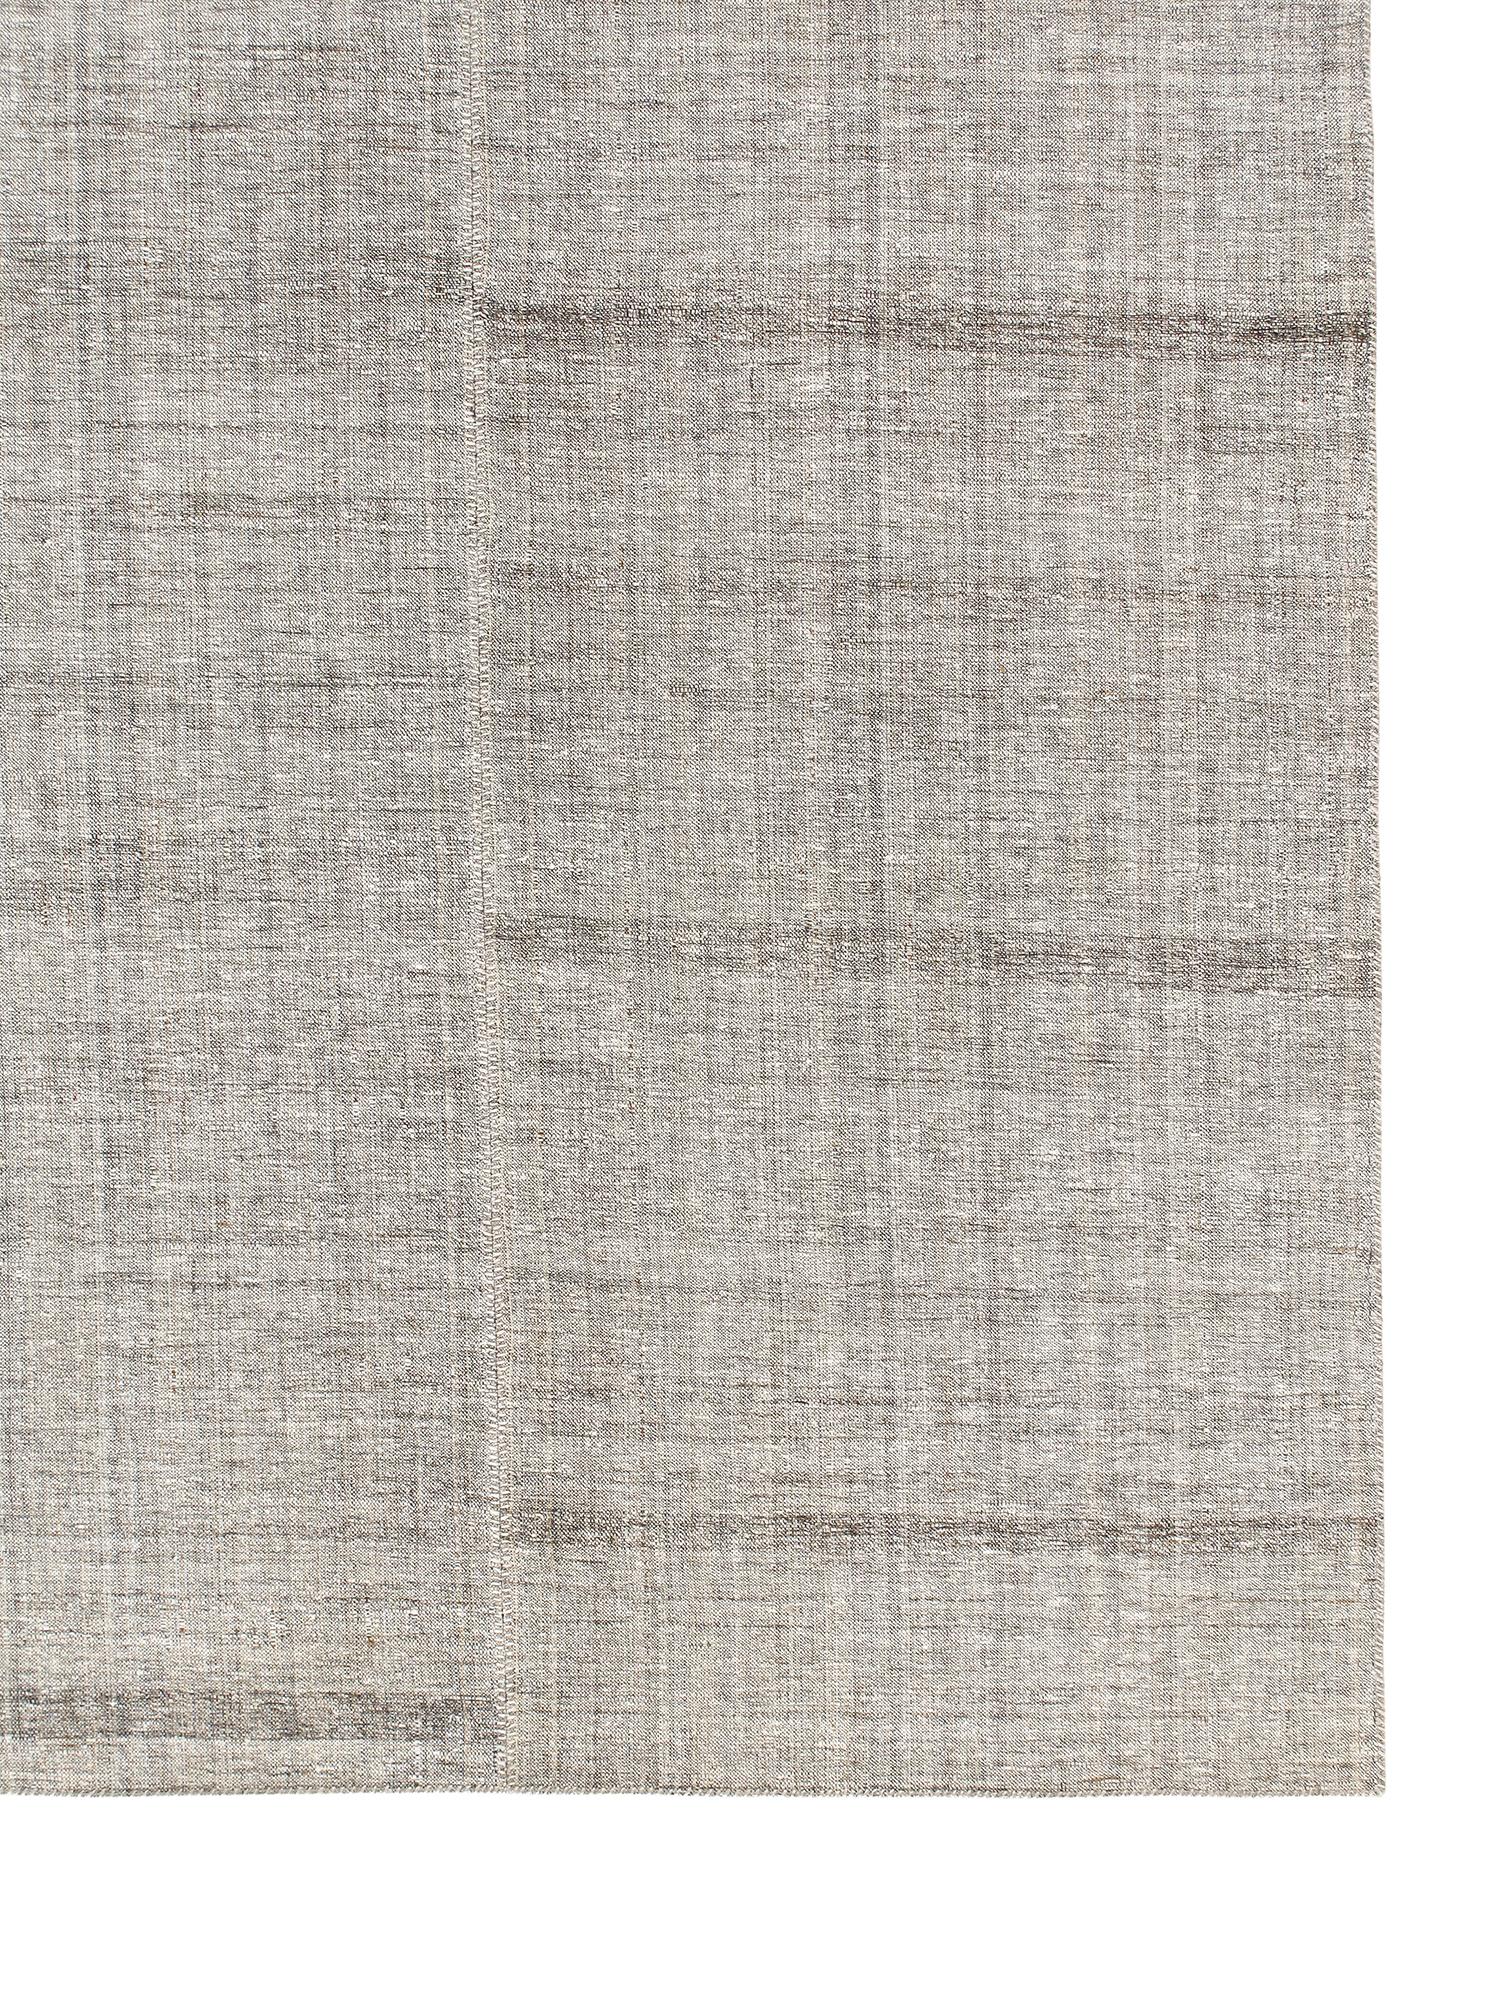 Hand-Woven Vintage Grey Toned Pelas Rug  For Sale